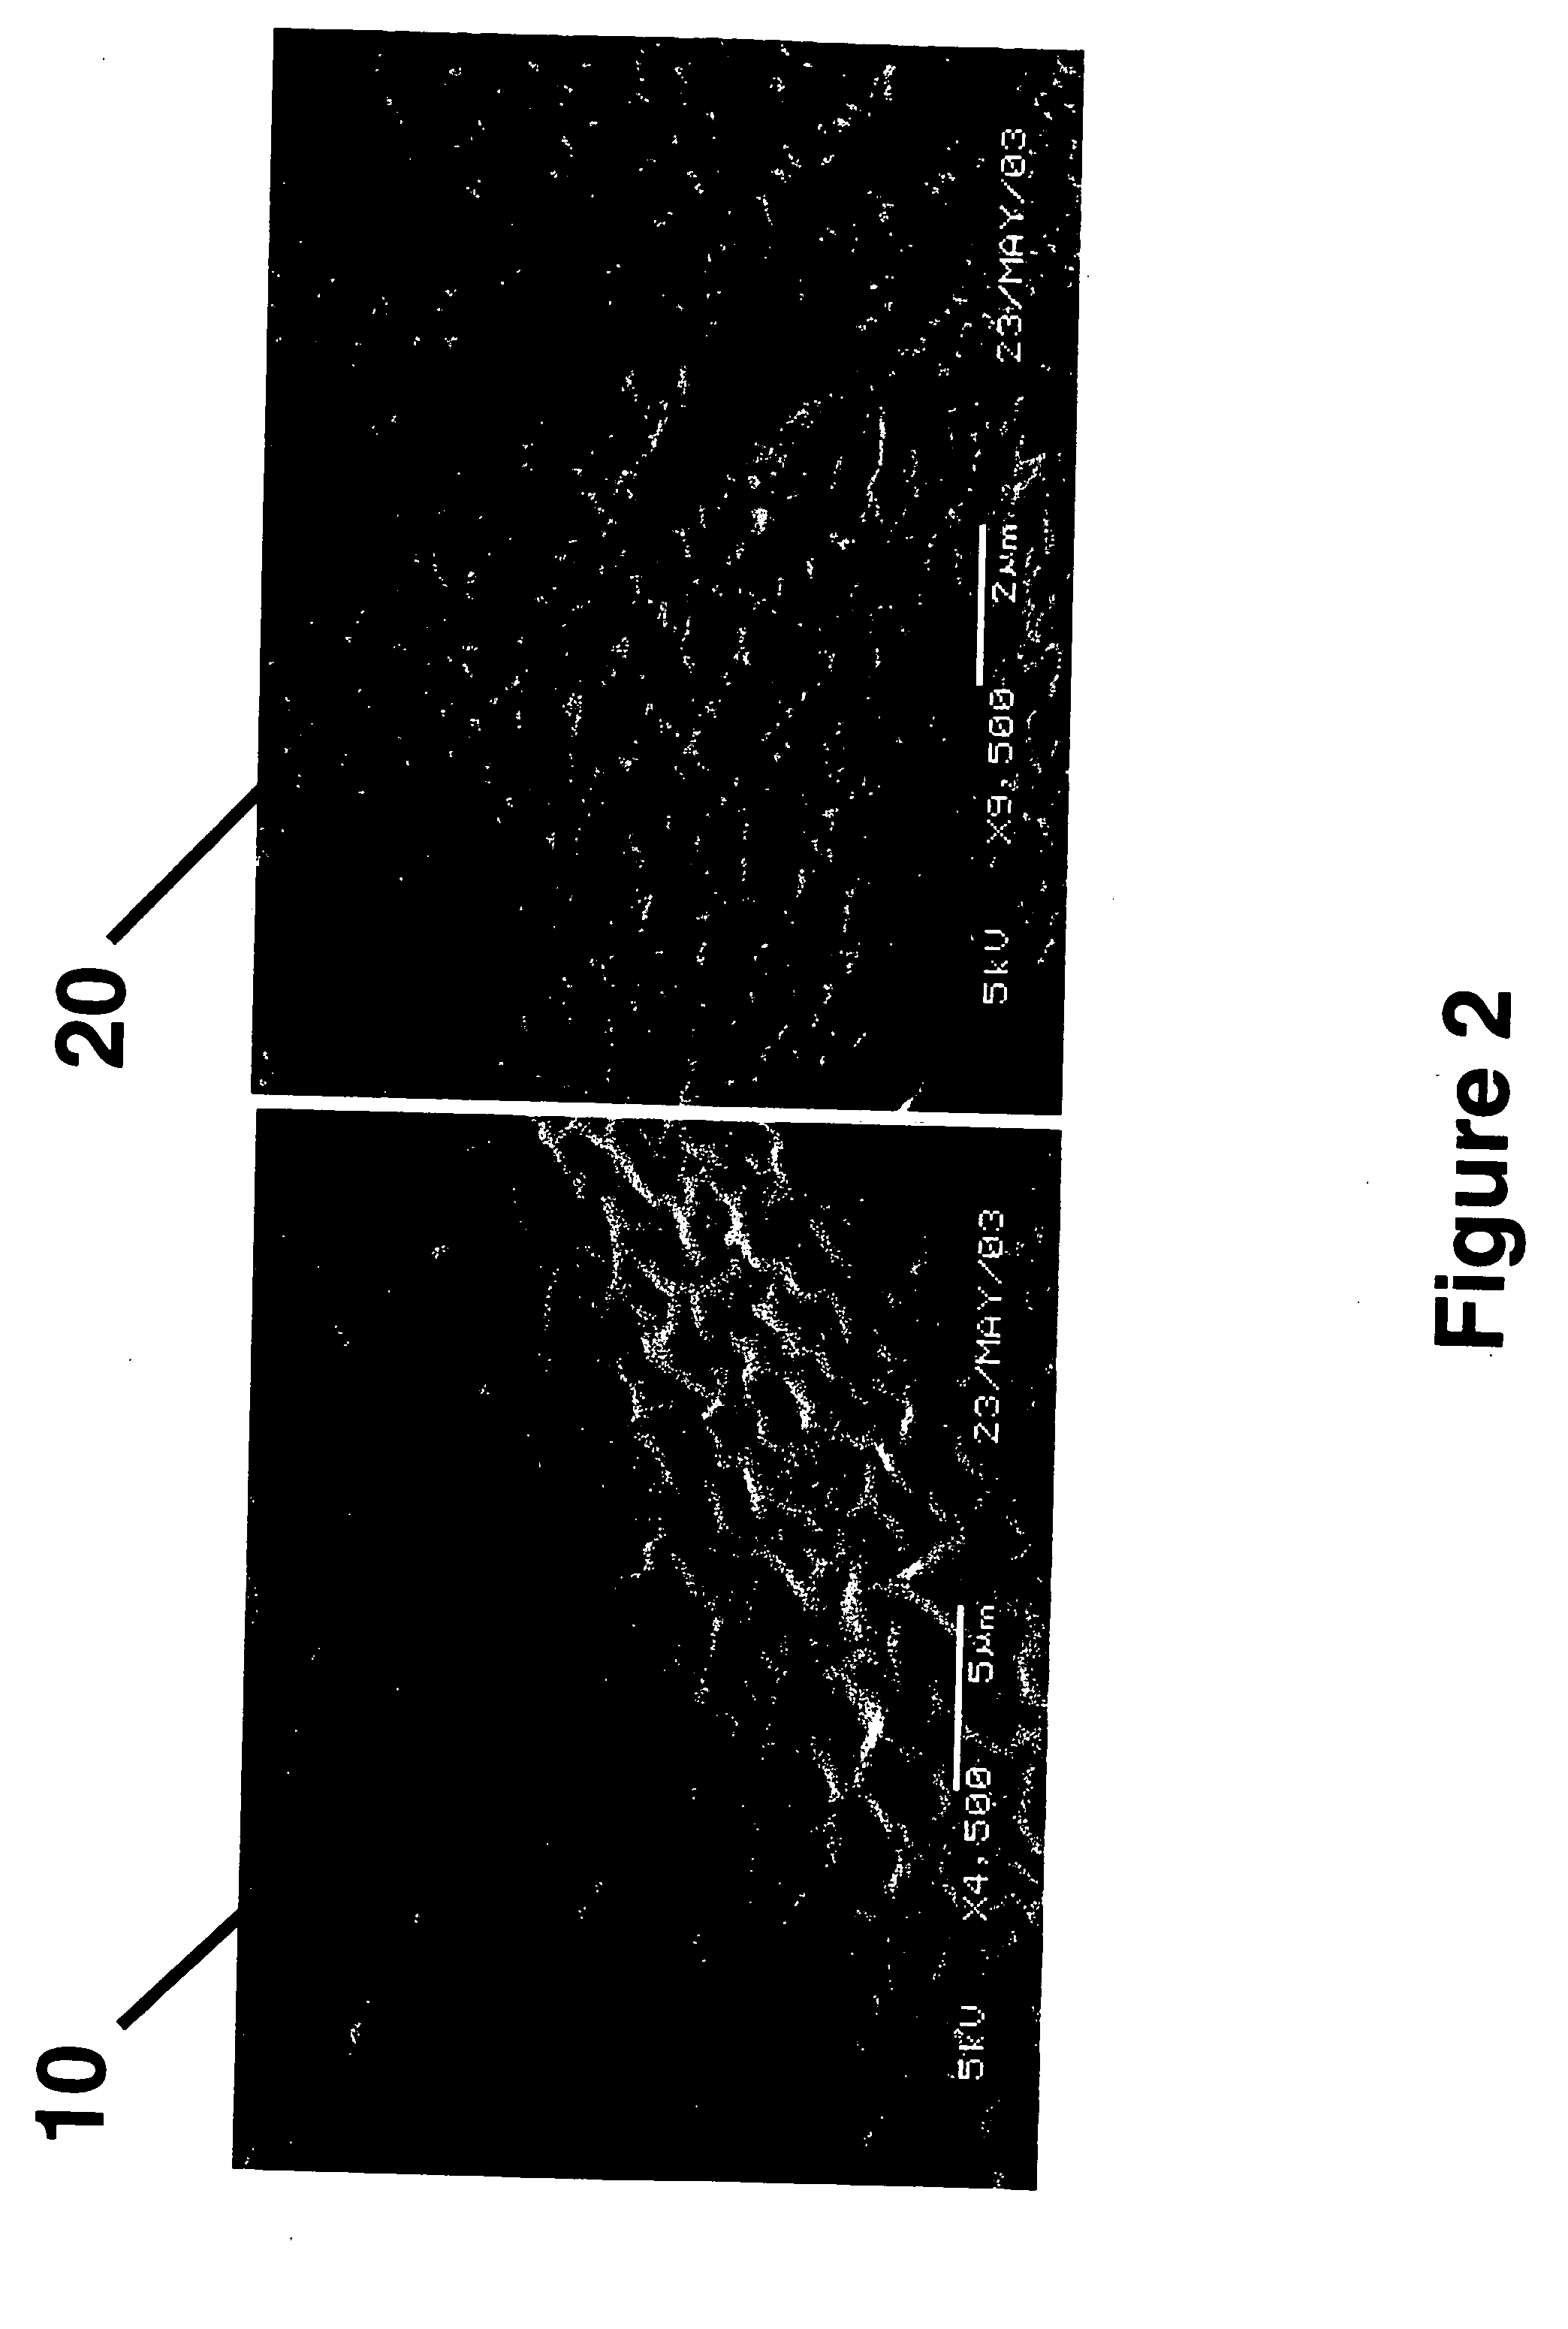 Method of utilizing MEMS based devices to produce electrospun fibers for commercial, industrial and medical use